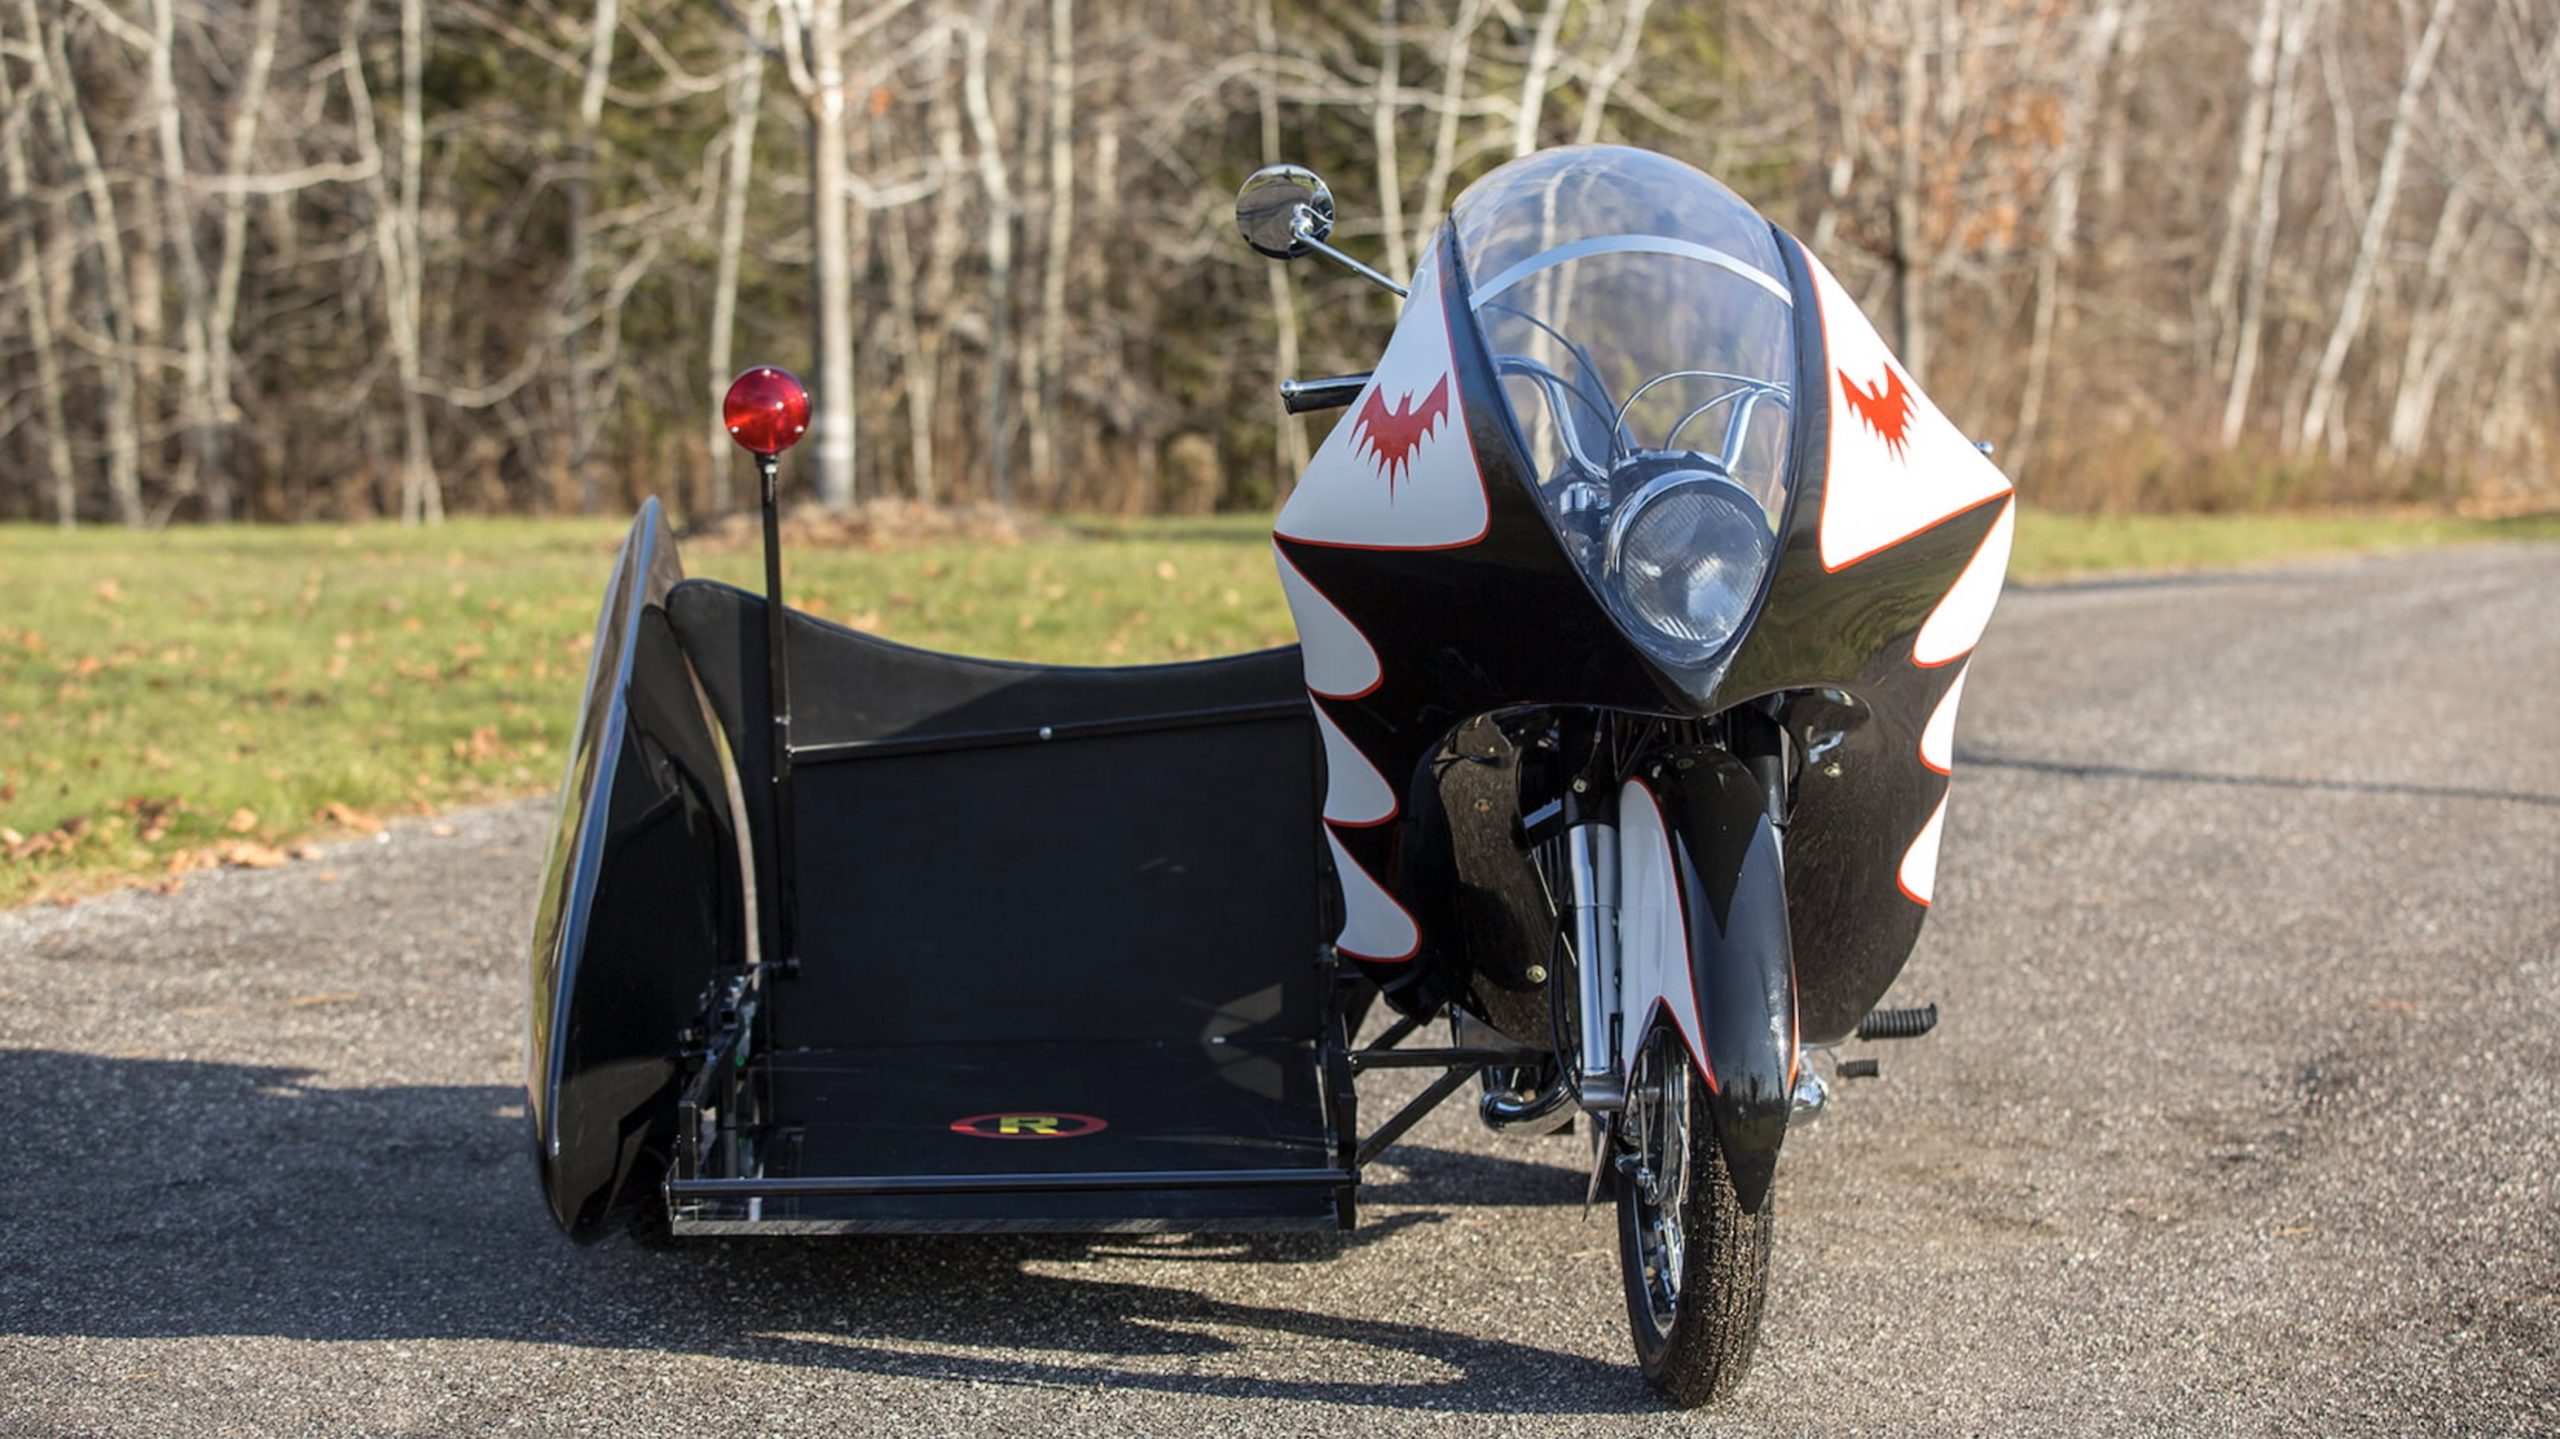 The Replica BatCycle about to go on auction, complete with Robin Go-Cart sidekick unit